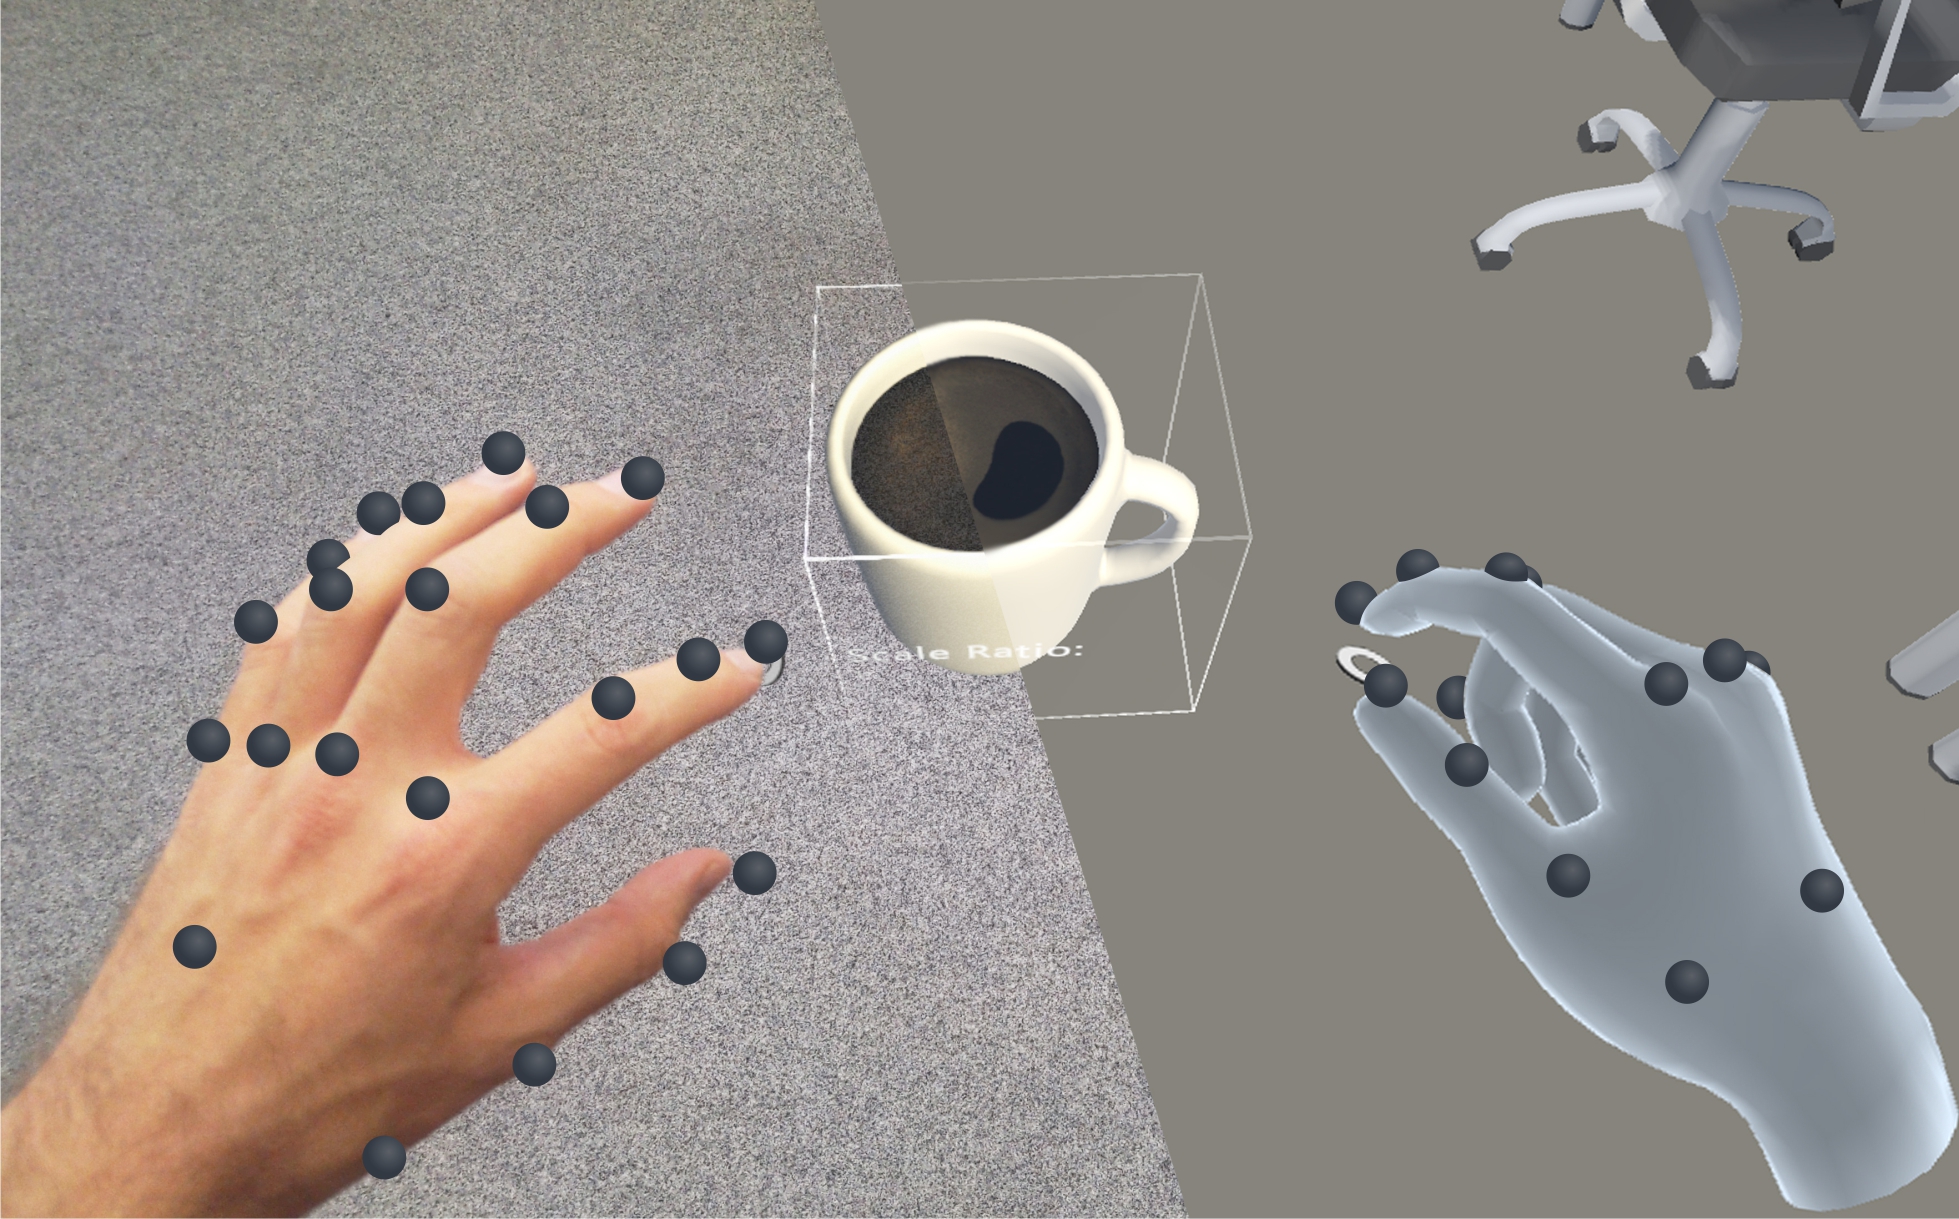 Identifying Users by Their Hand Tracking Data in Augmented and Virtual Reality